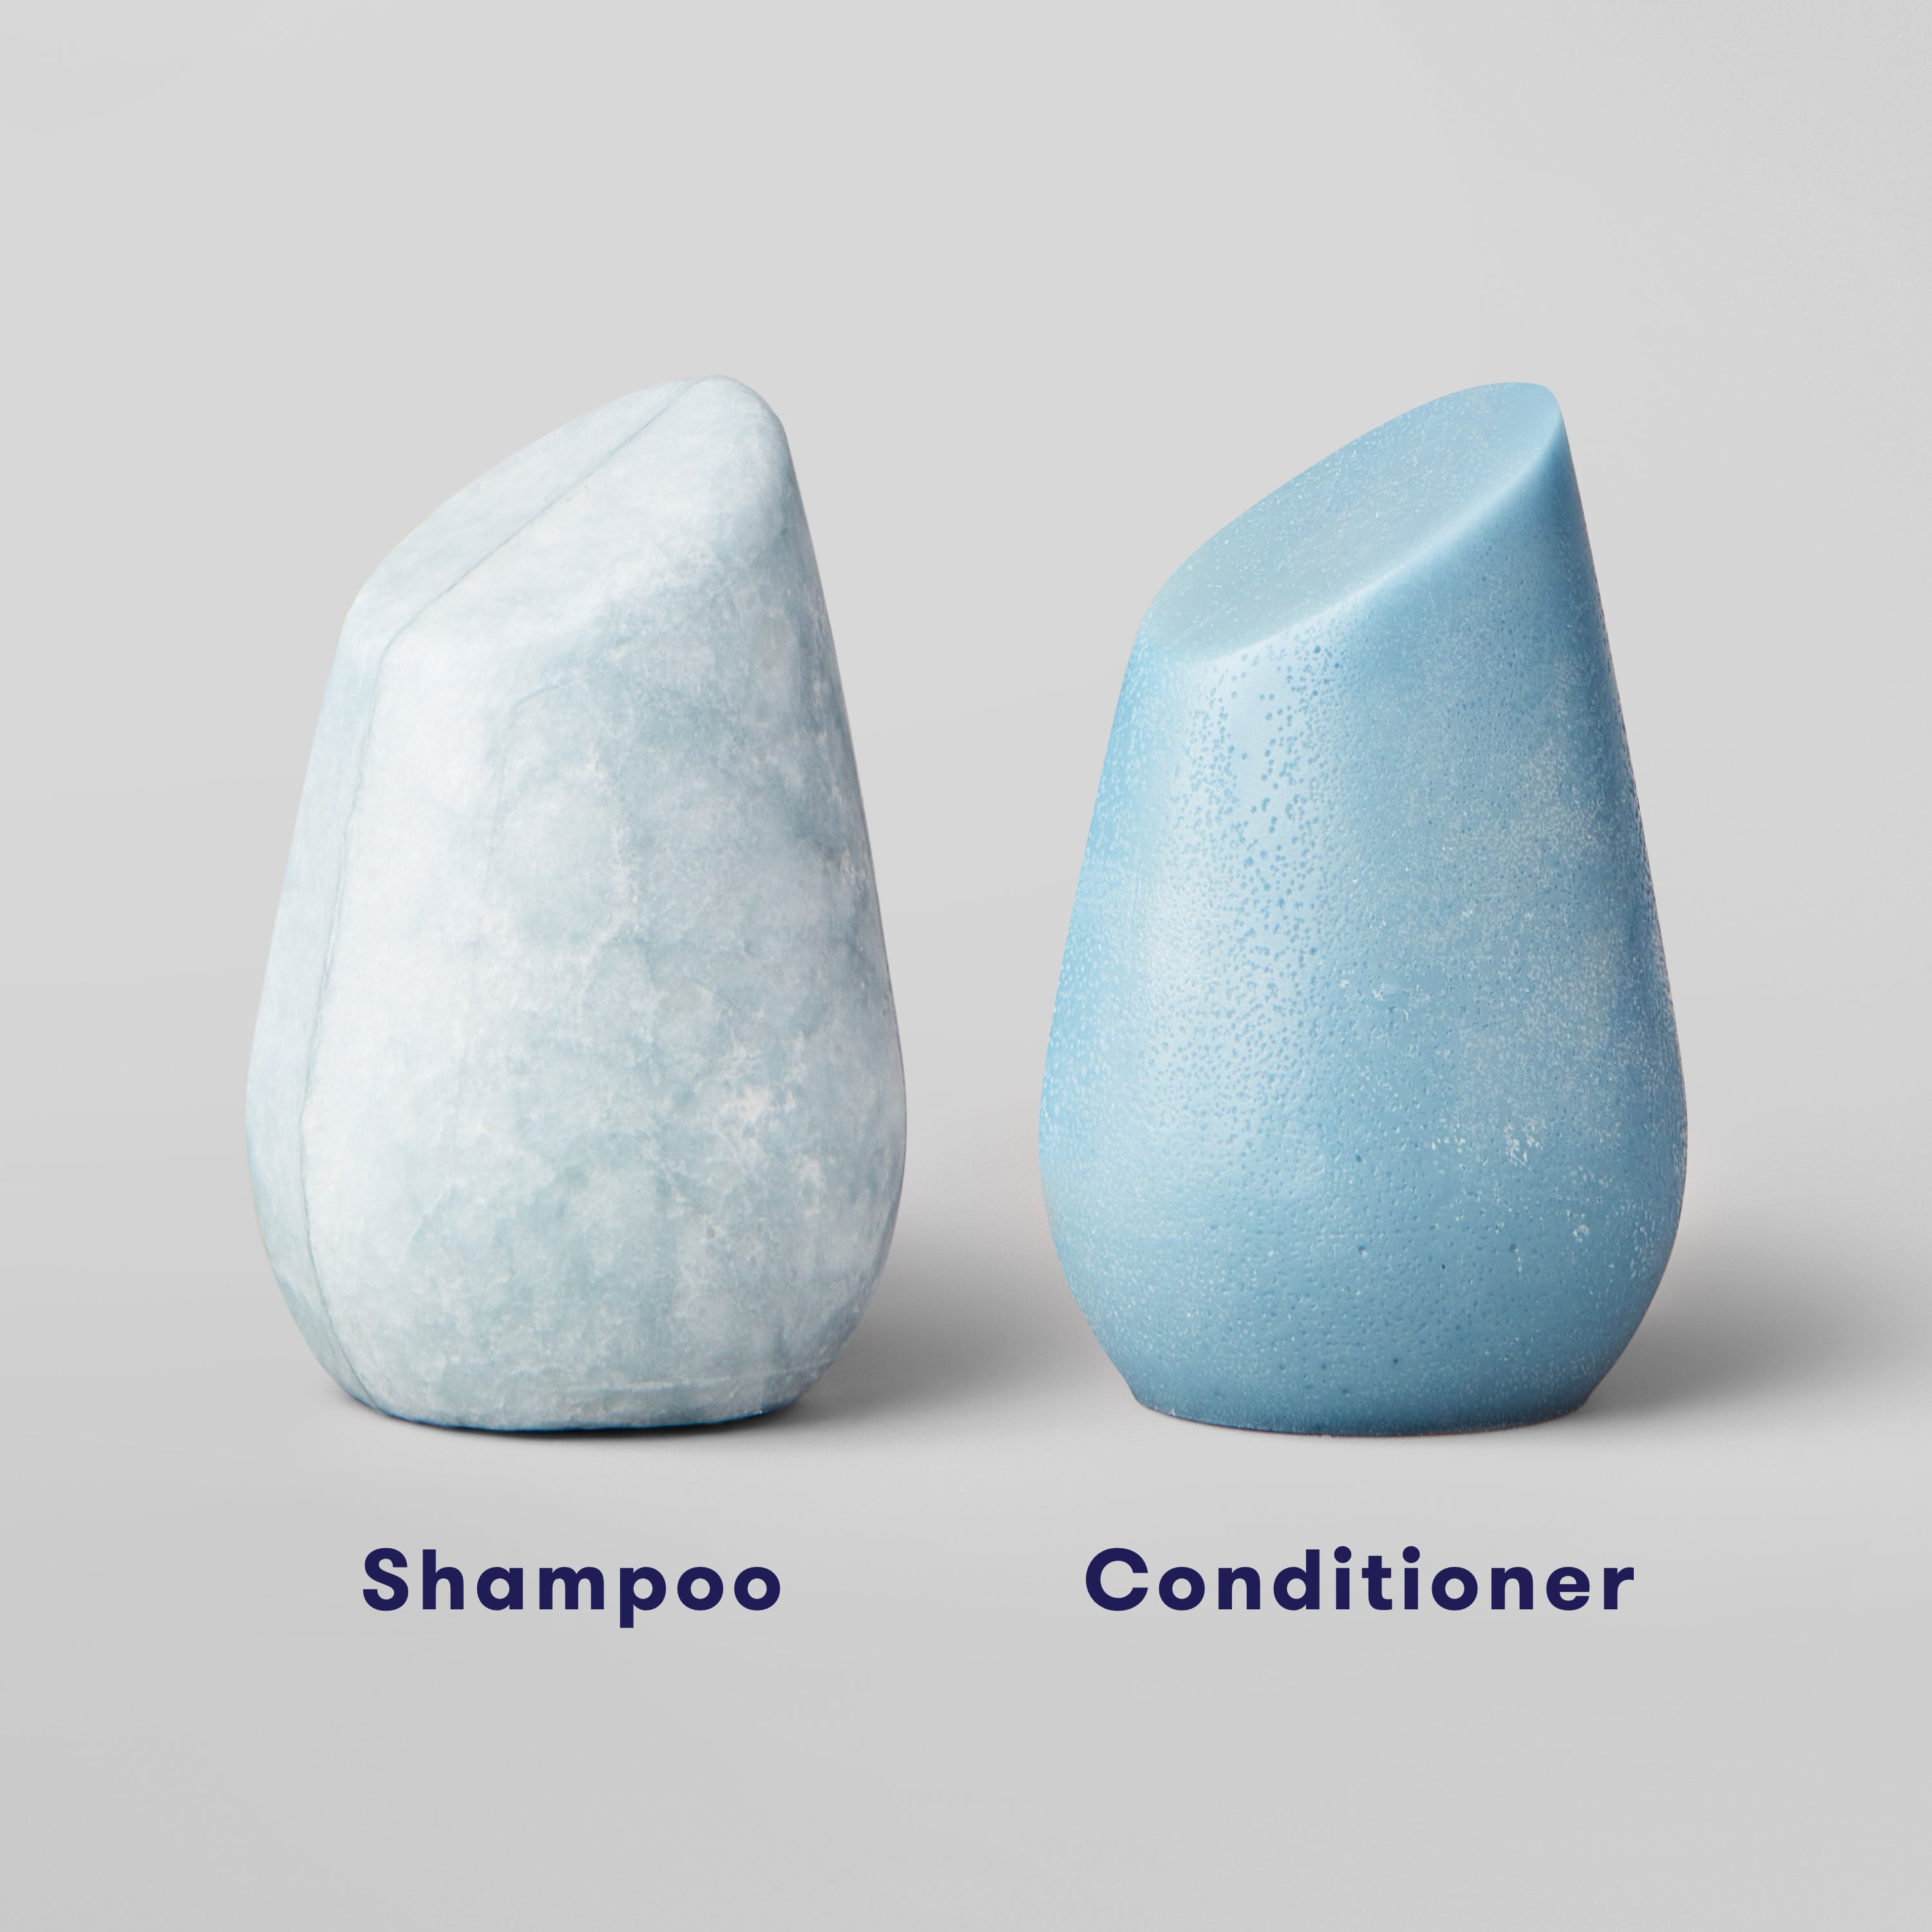 Shampoo bar sitting next to conditioner bar to show the color difference between the two.